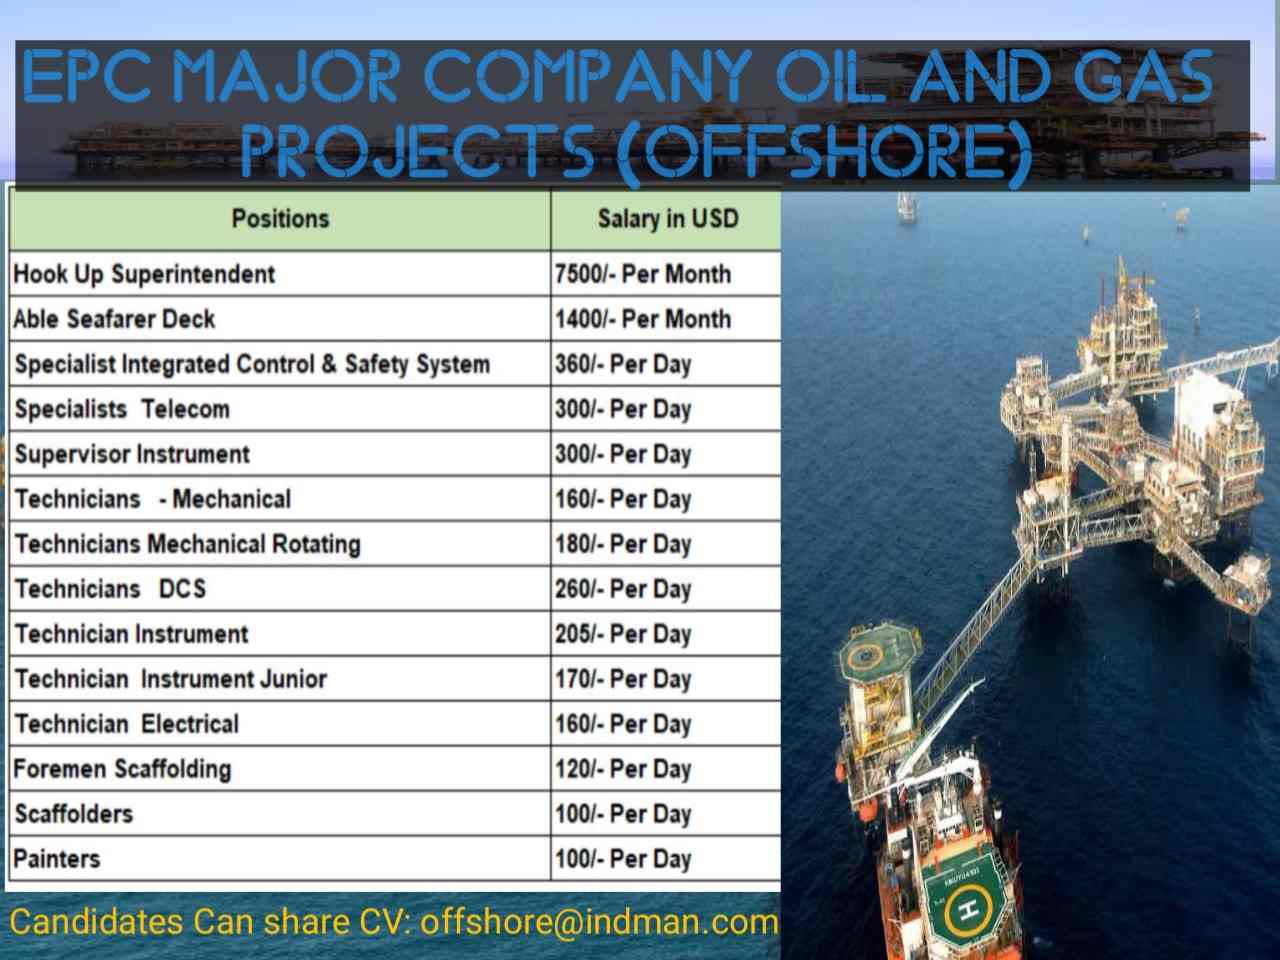 Multinational EPC Company having Major Oil and Gas Projects (Offshore) worldwide are looking to mobilize